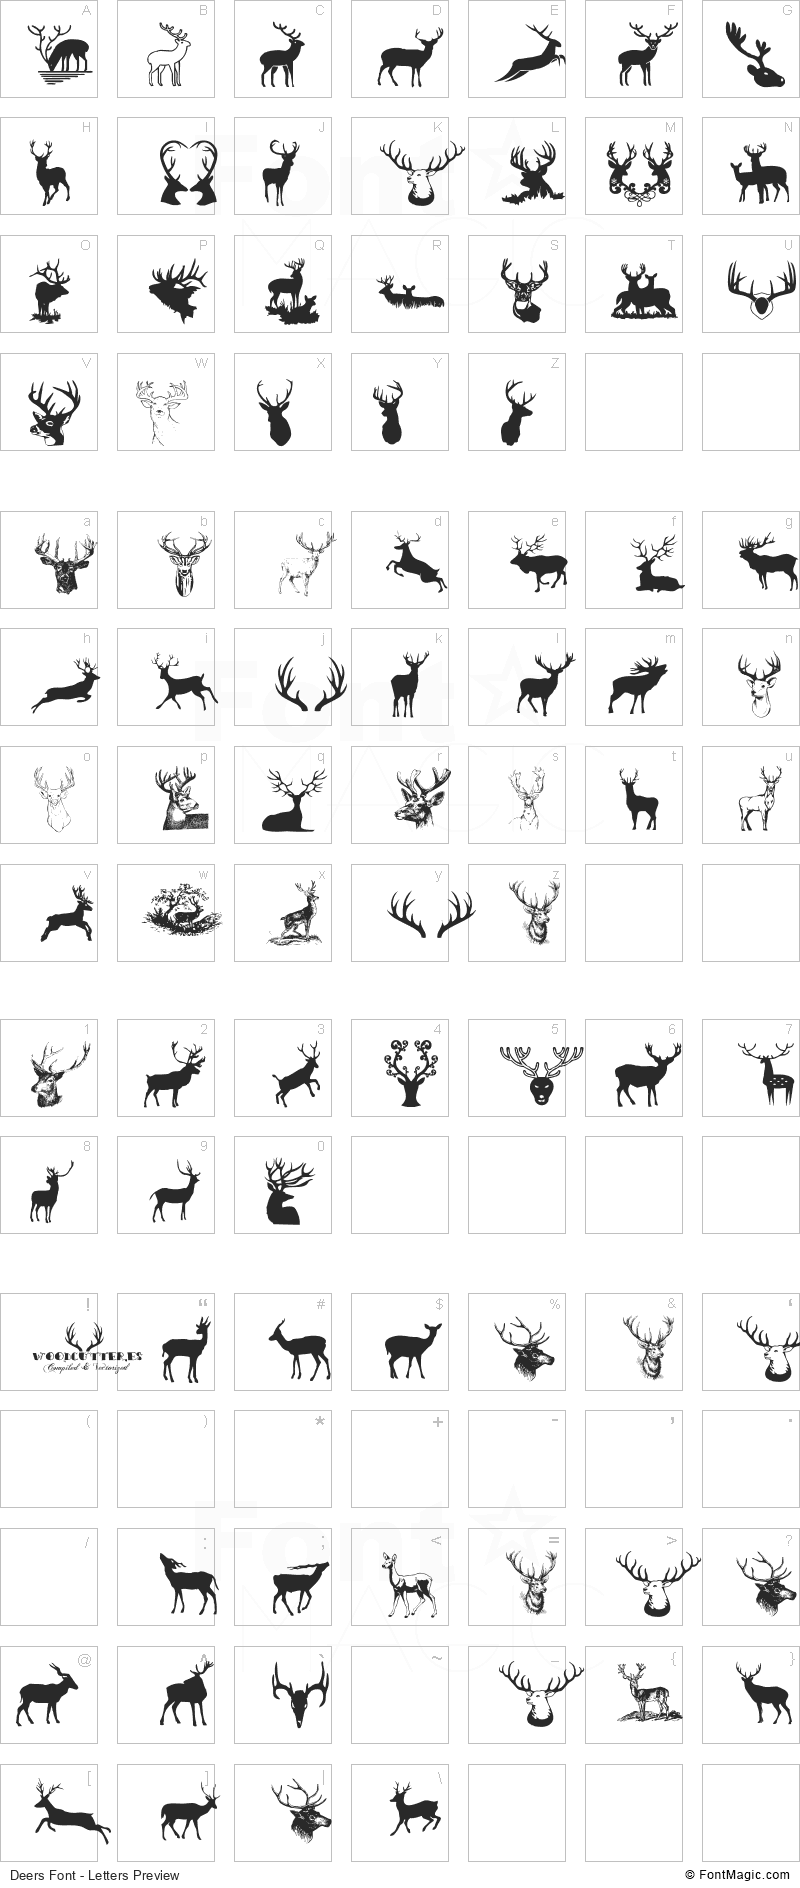 Deers Font - All Latters Preview Chart